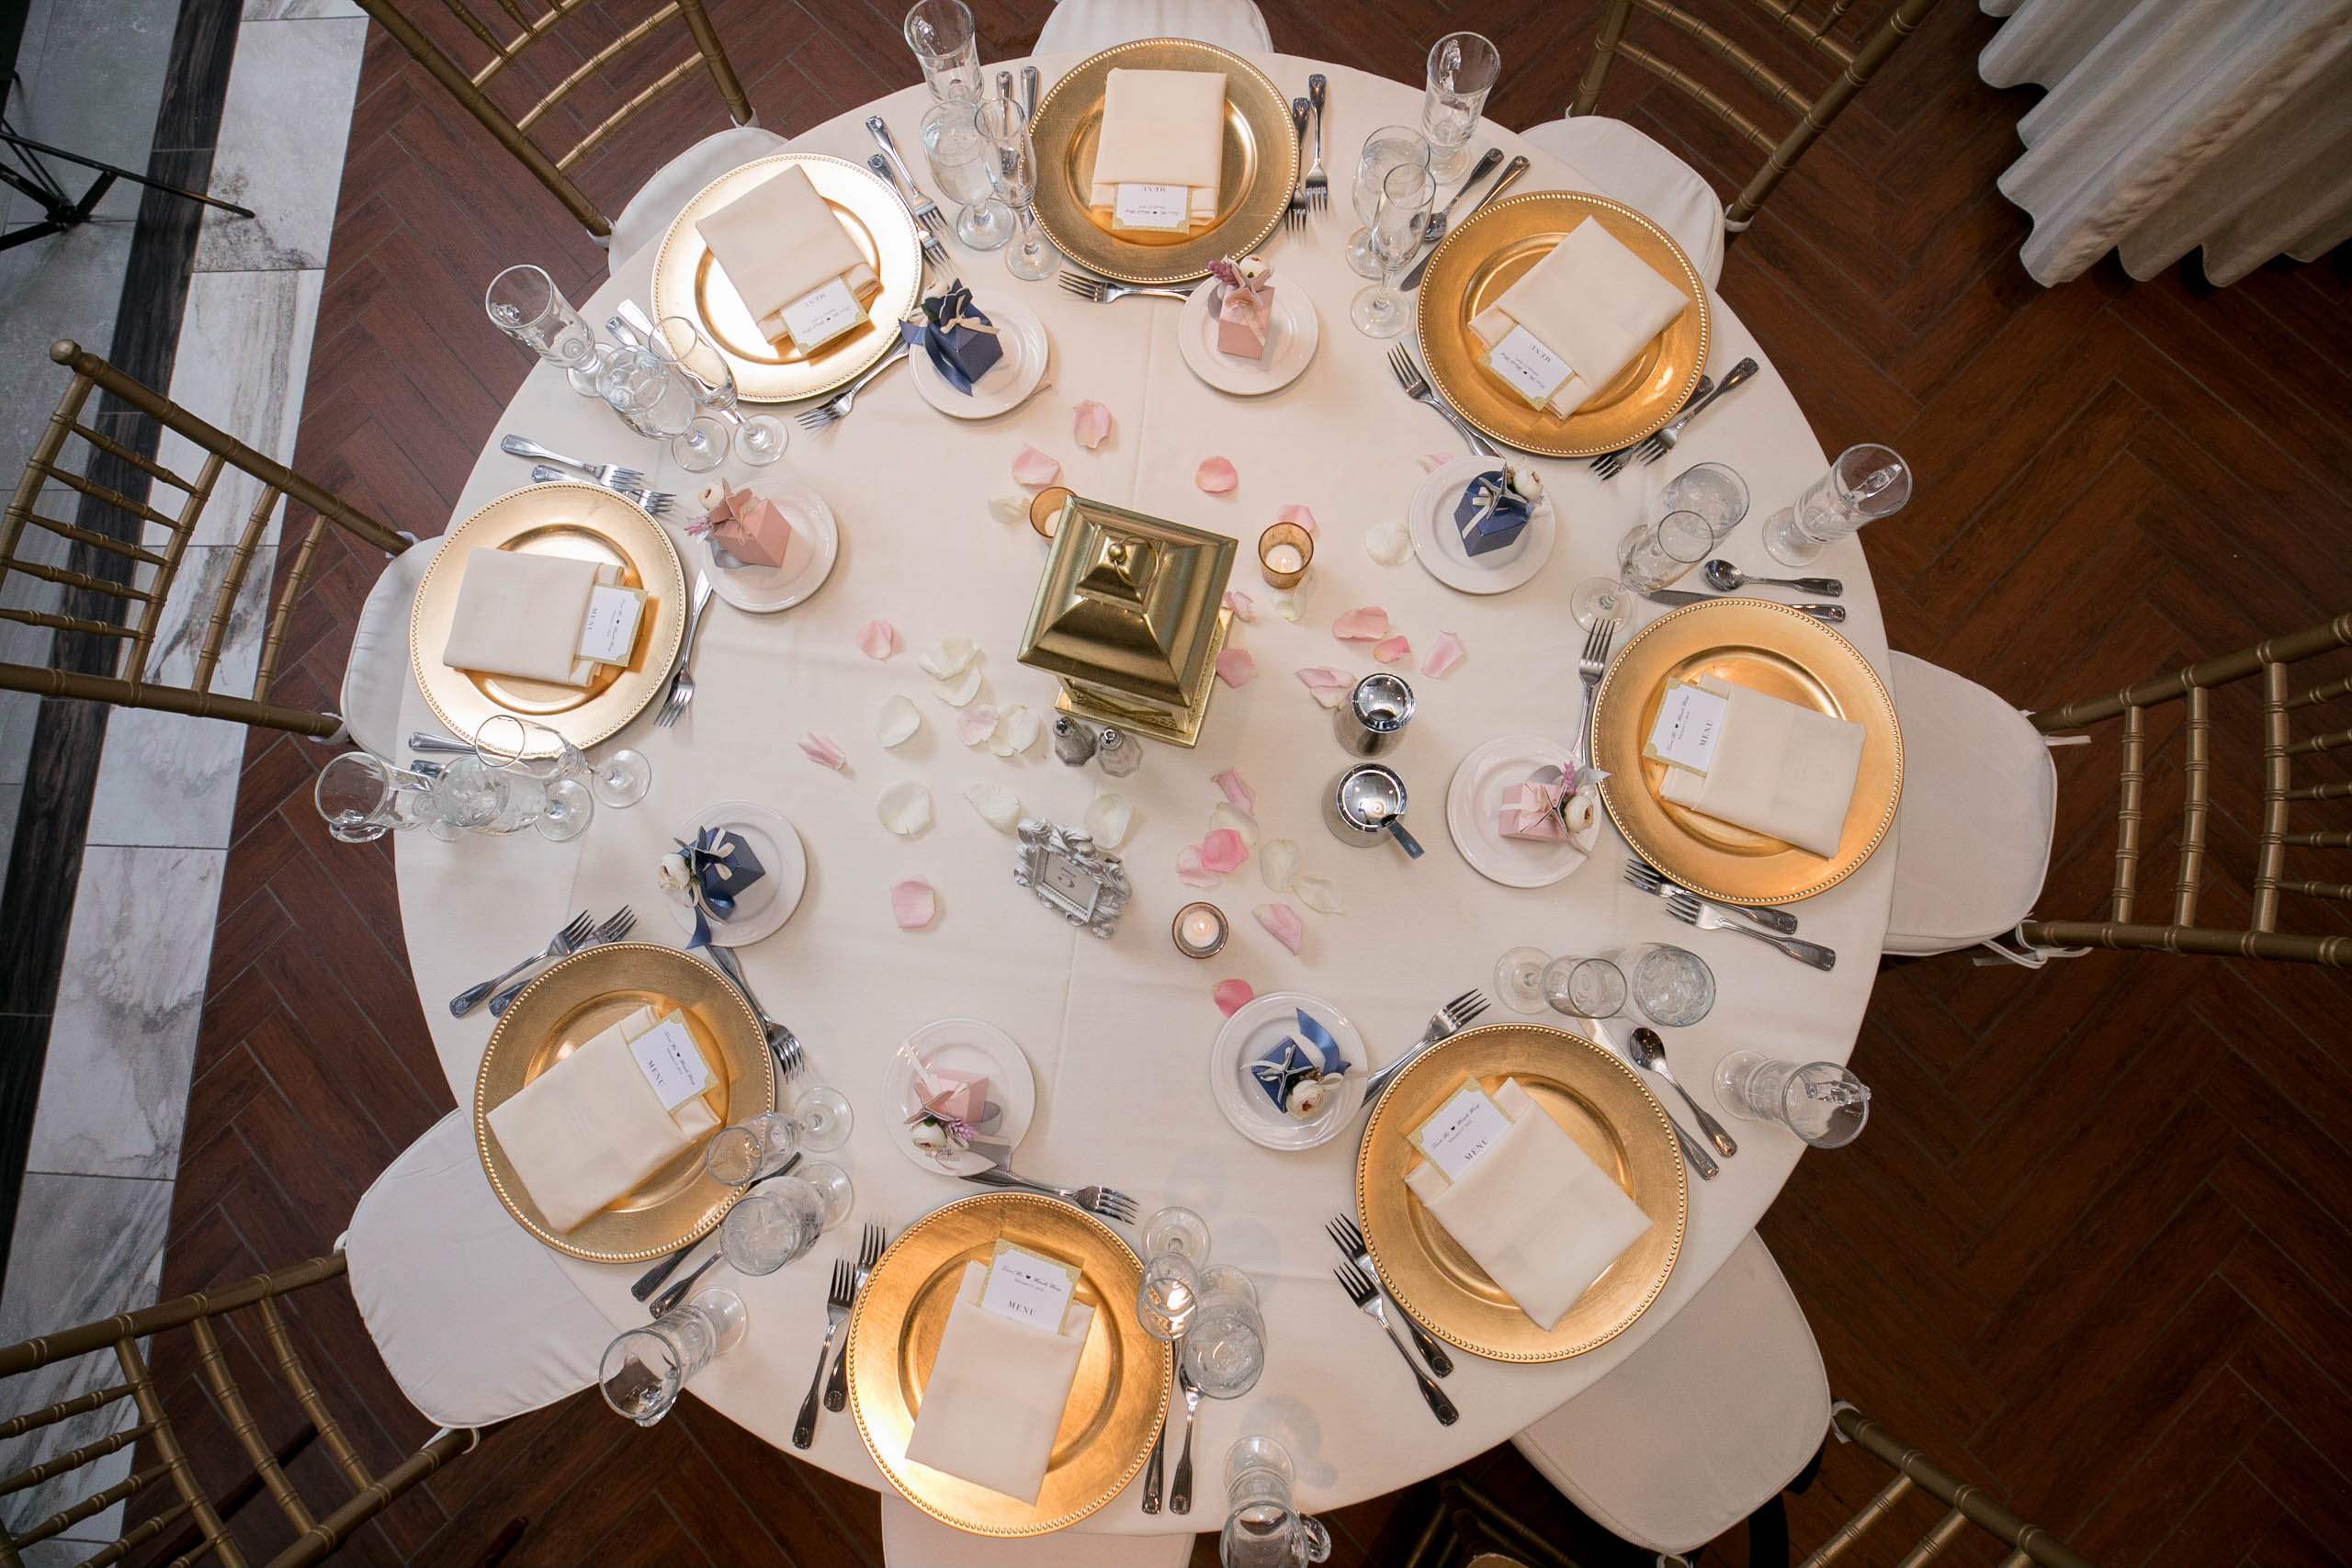 An overhead shot of a table covered with a white table cloth shows place settings, a gold lantern, and white and pink rose petals. 